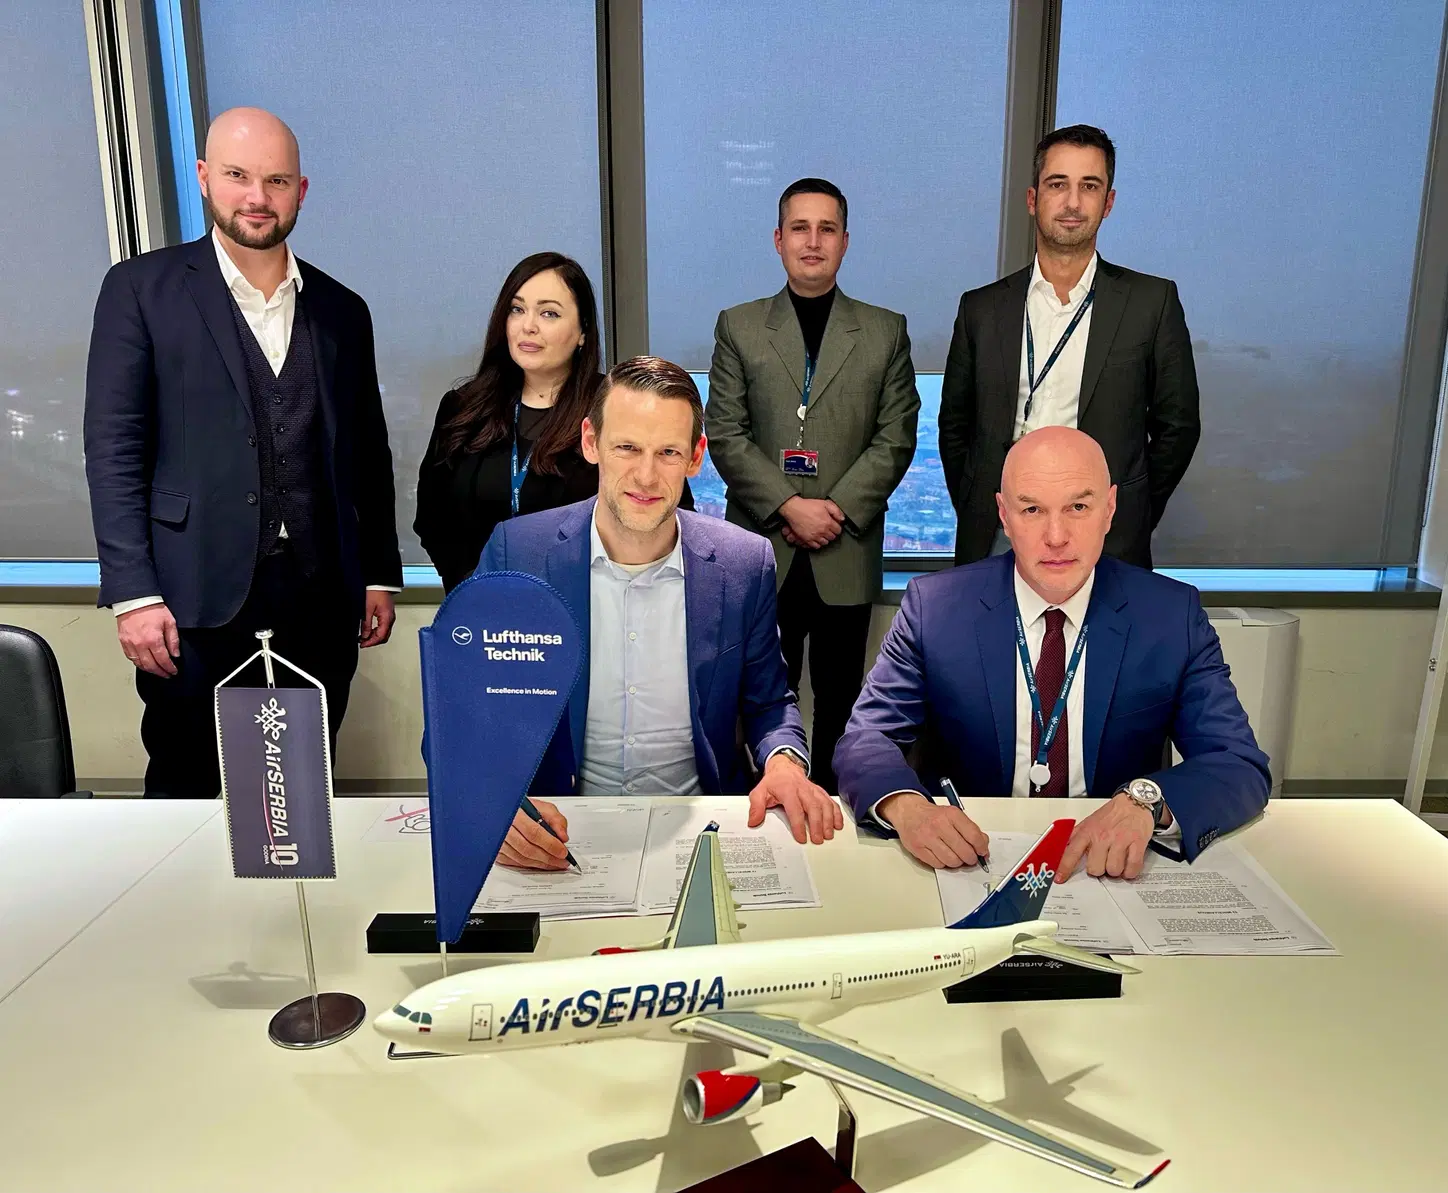 Lufthansa Technik to Provide Total Component Support for Air Serbia